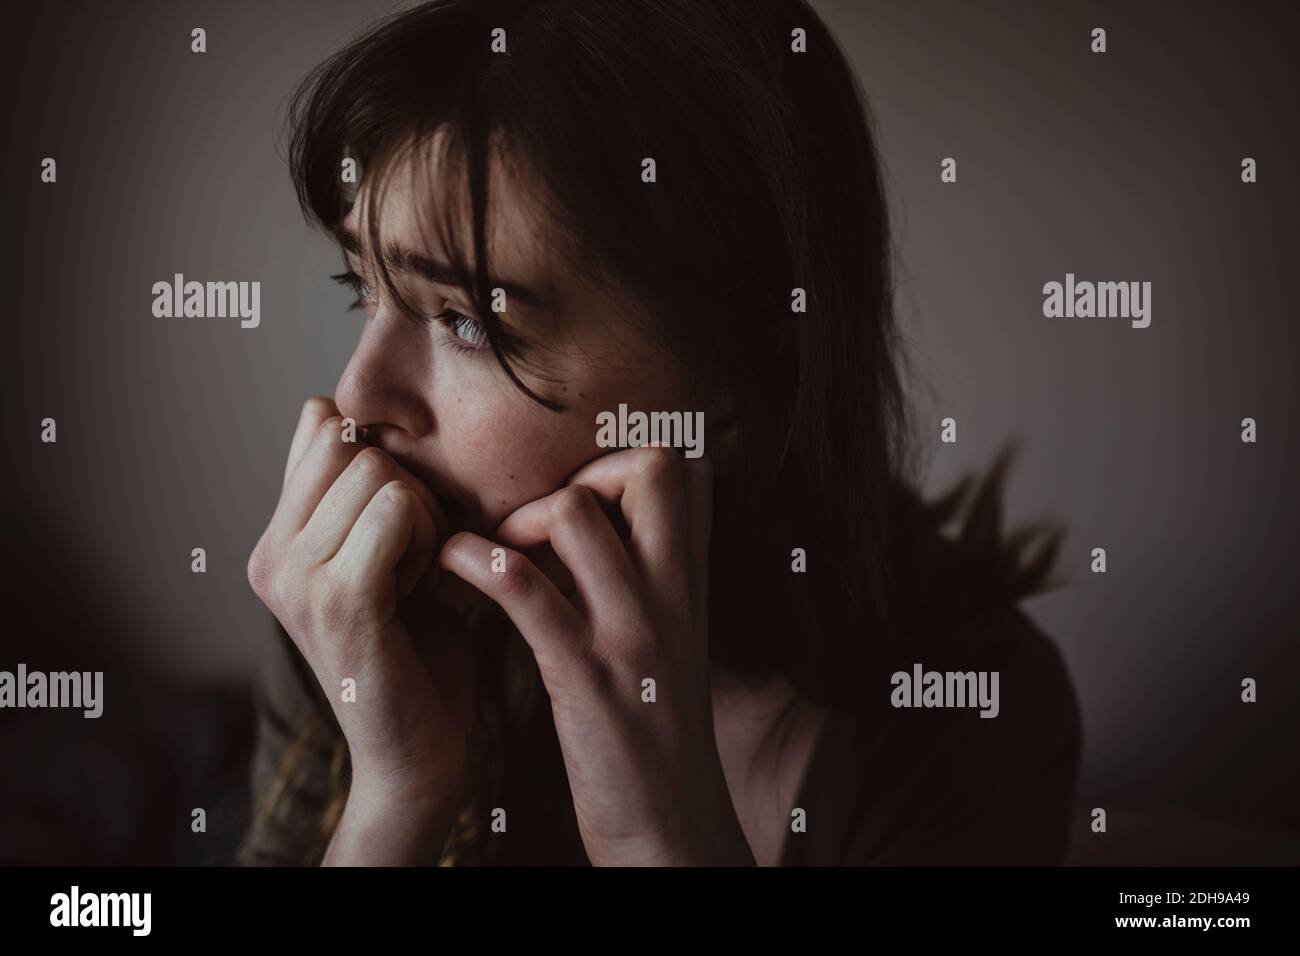 Close-up of worried woman looking away Stock Photo